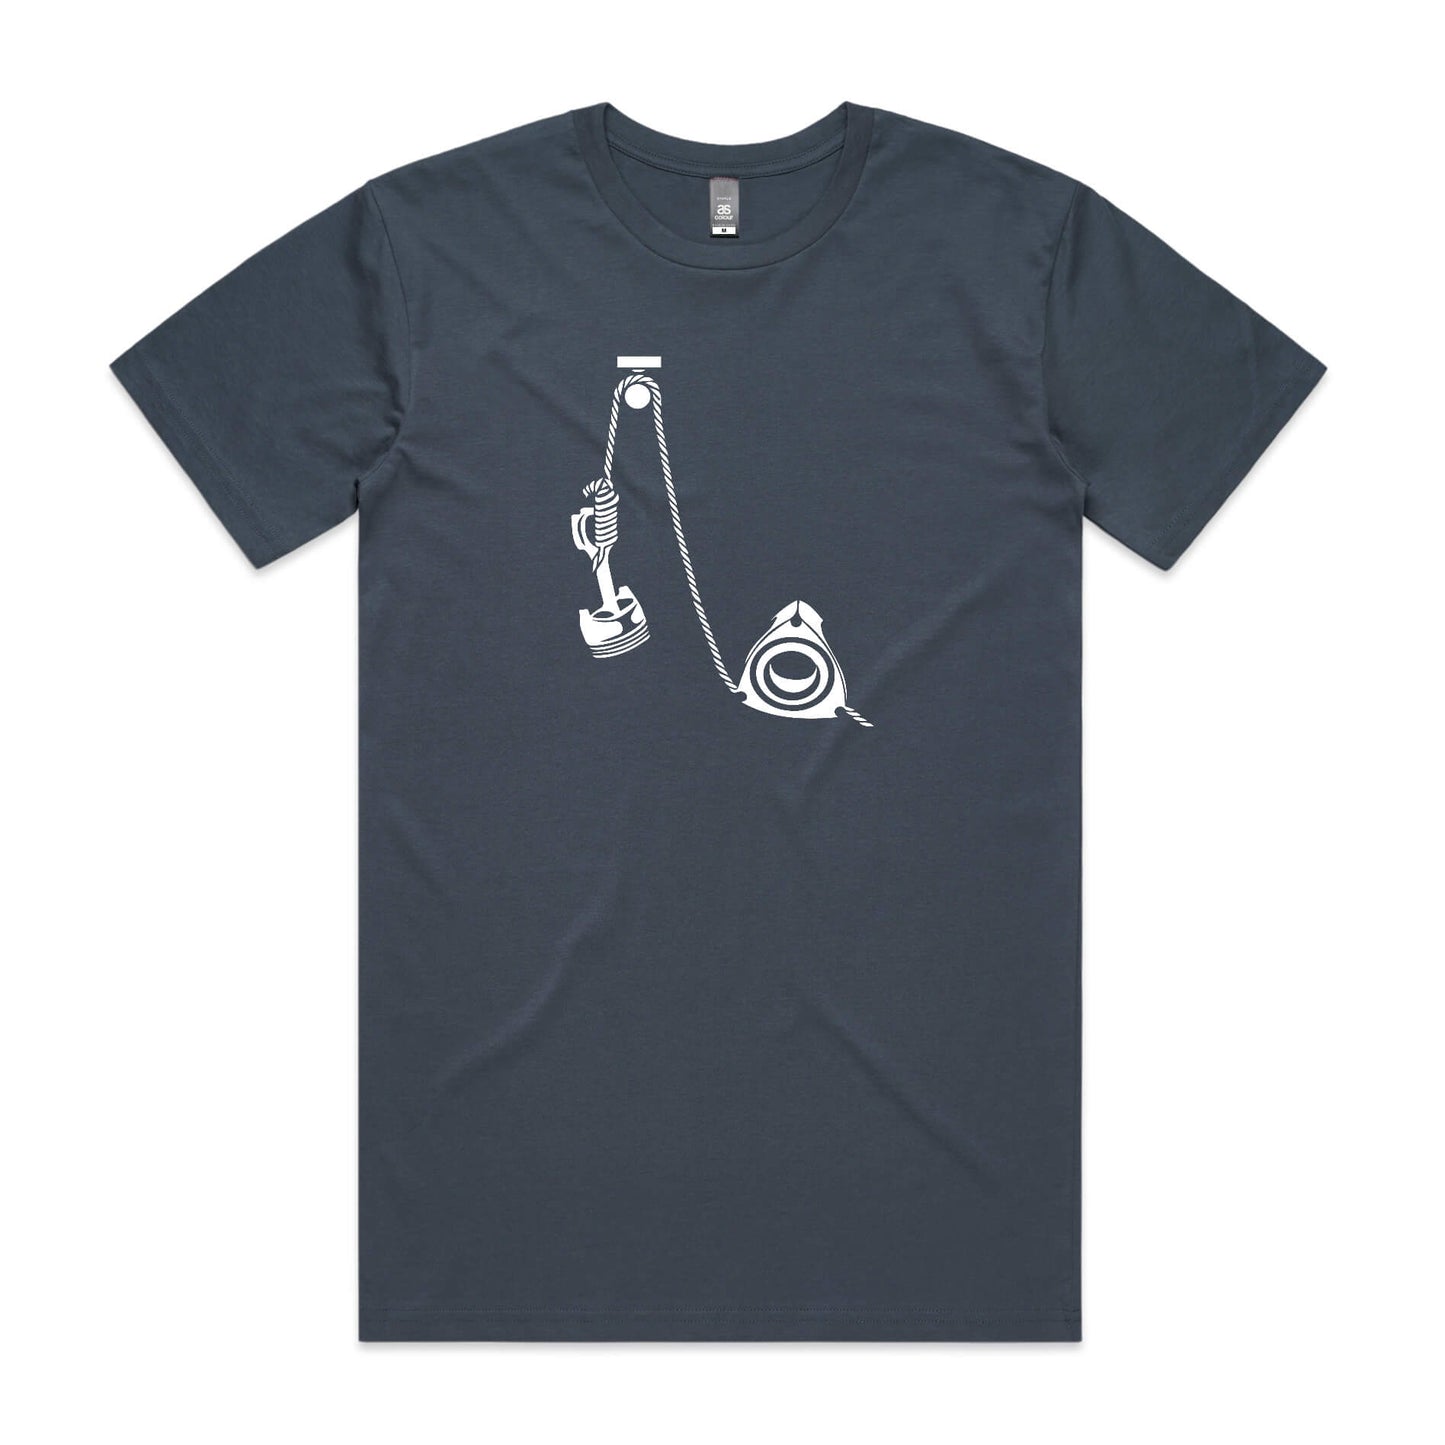 Rotary hangs piston t-shirt in petrol blue featuring a white cartoon of a rotary holding a piston in a noose